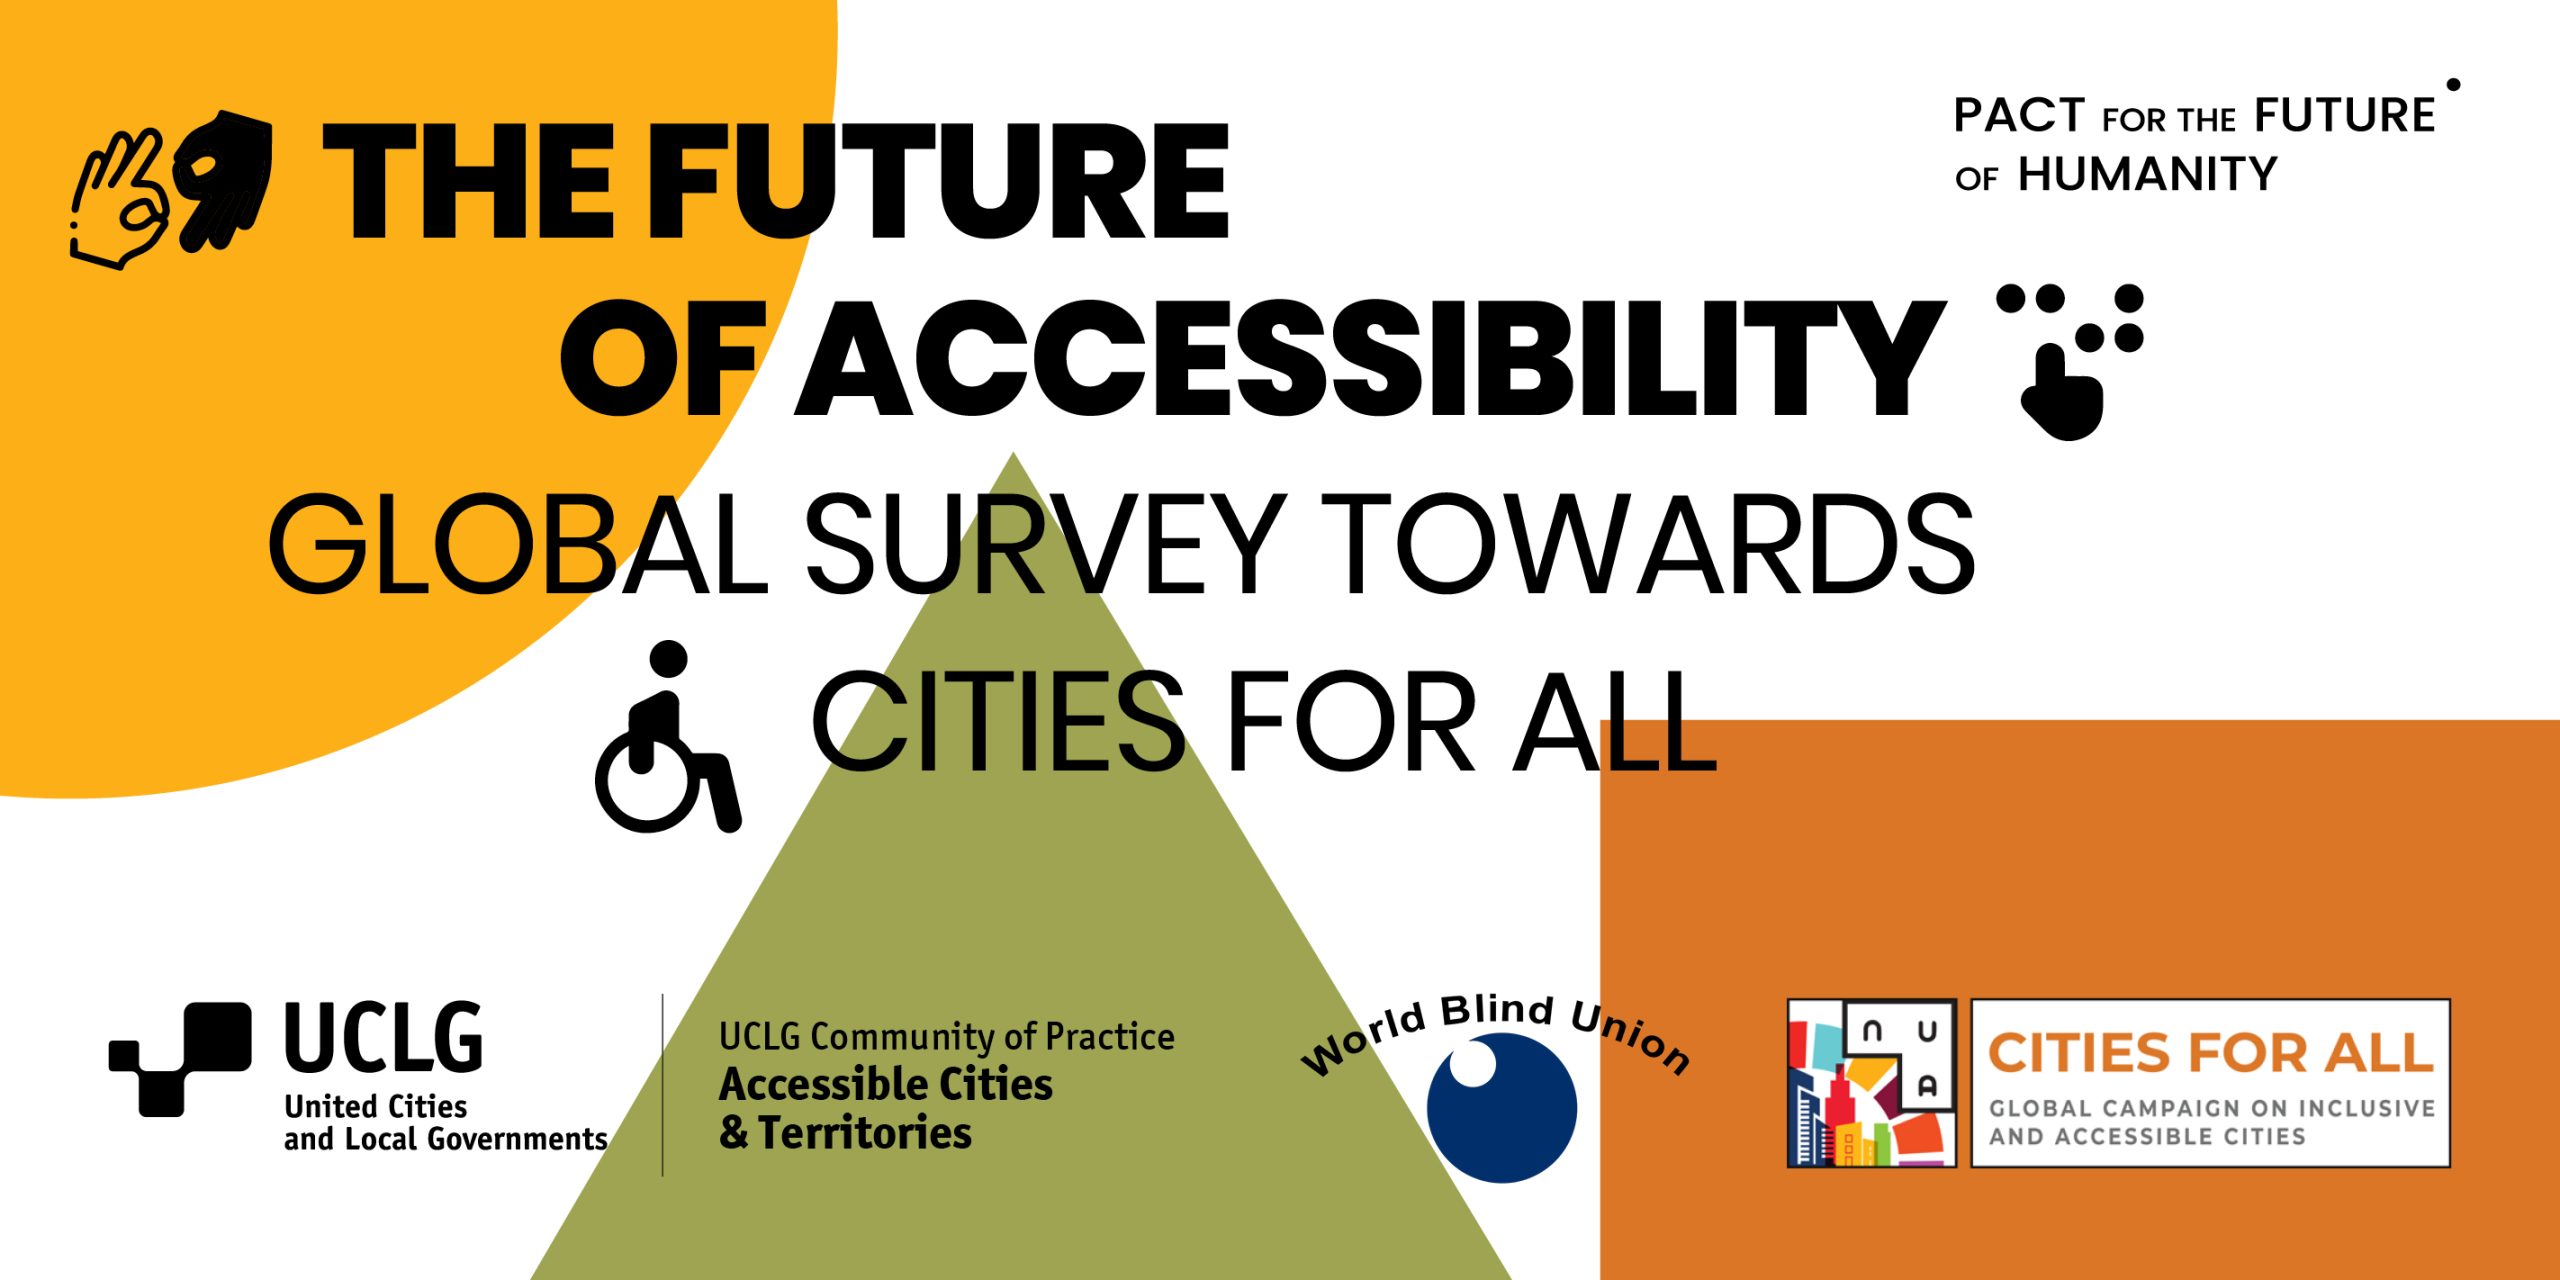 Banner for the The Future of Accessibility: Global Survey Towards Cities for All. Logos of the UCLG, the World Blind Union, the UCLG Community of Practice Accessibility and the Cities for All Campaign are include. Different shapes come to give a perspective of how accessibility comes together in different shapes